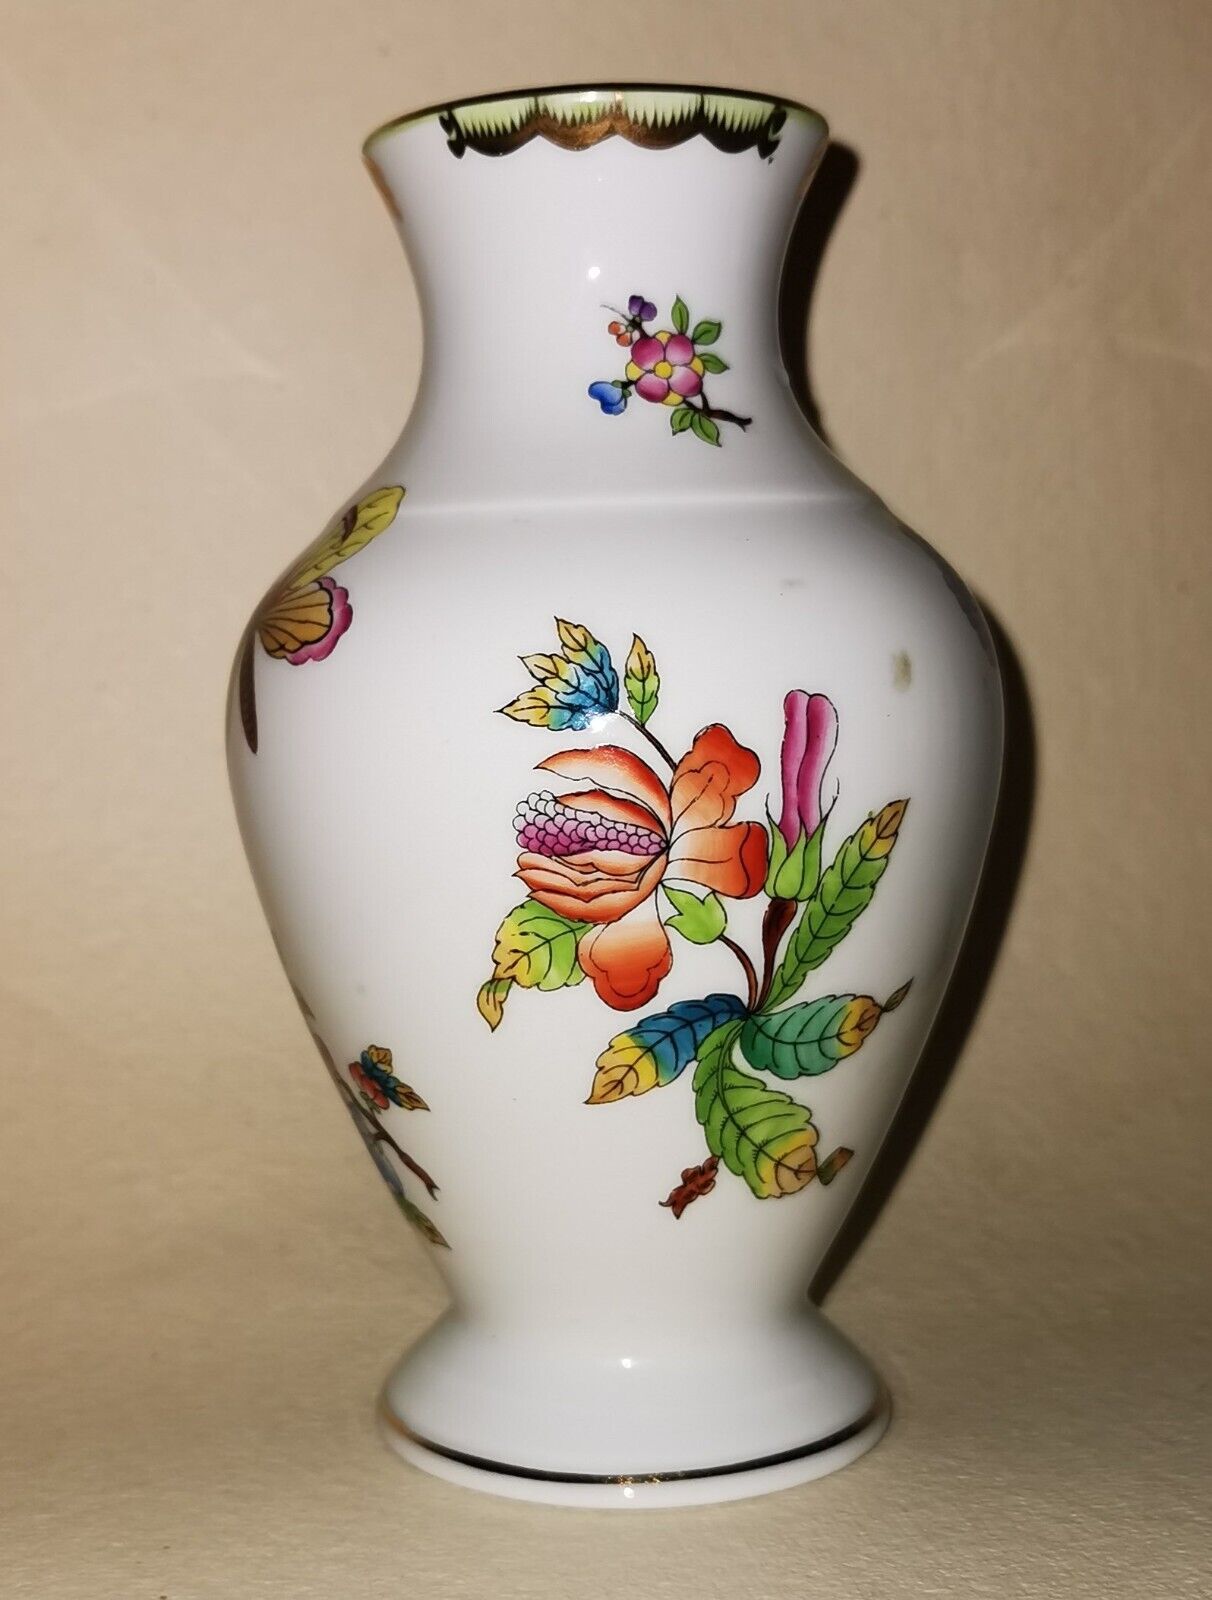 Elegant porcelain vase - Butterflies and flower decoration from Herend Hungary